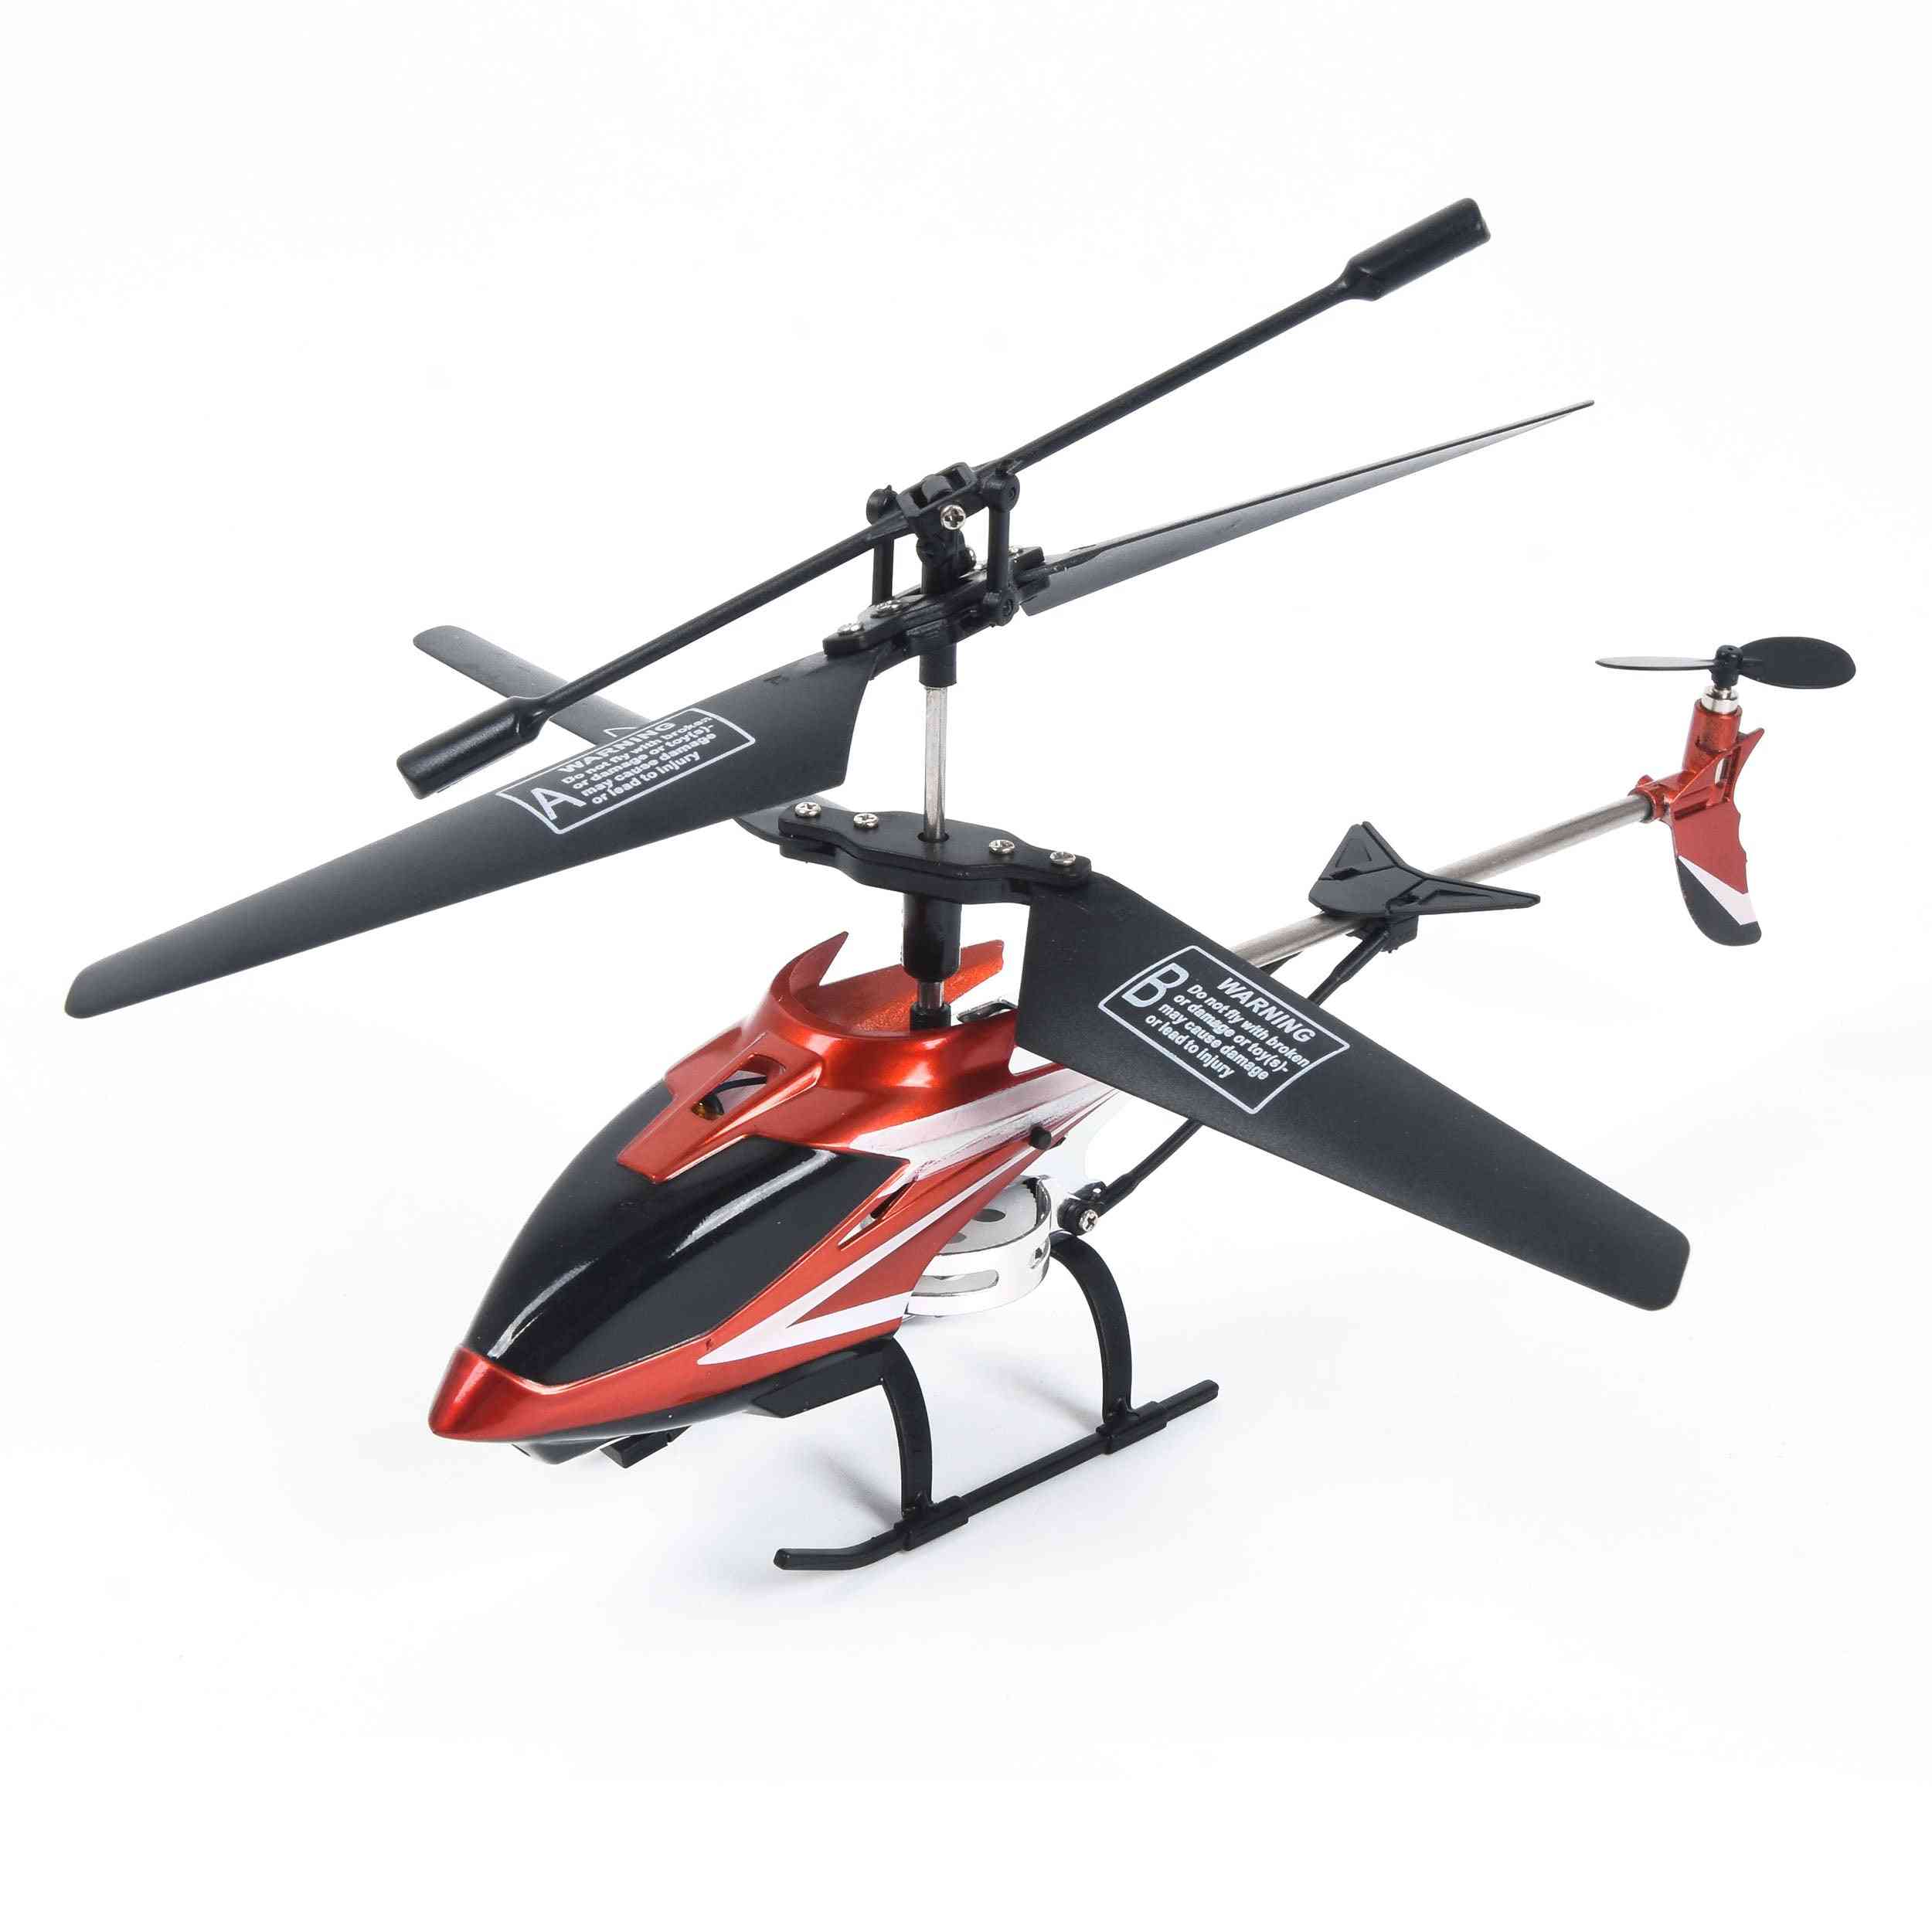 3.5 Channe Lremote Control Metal Helicopter